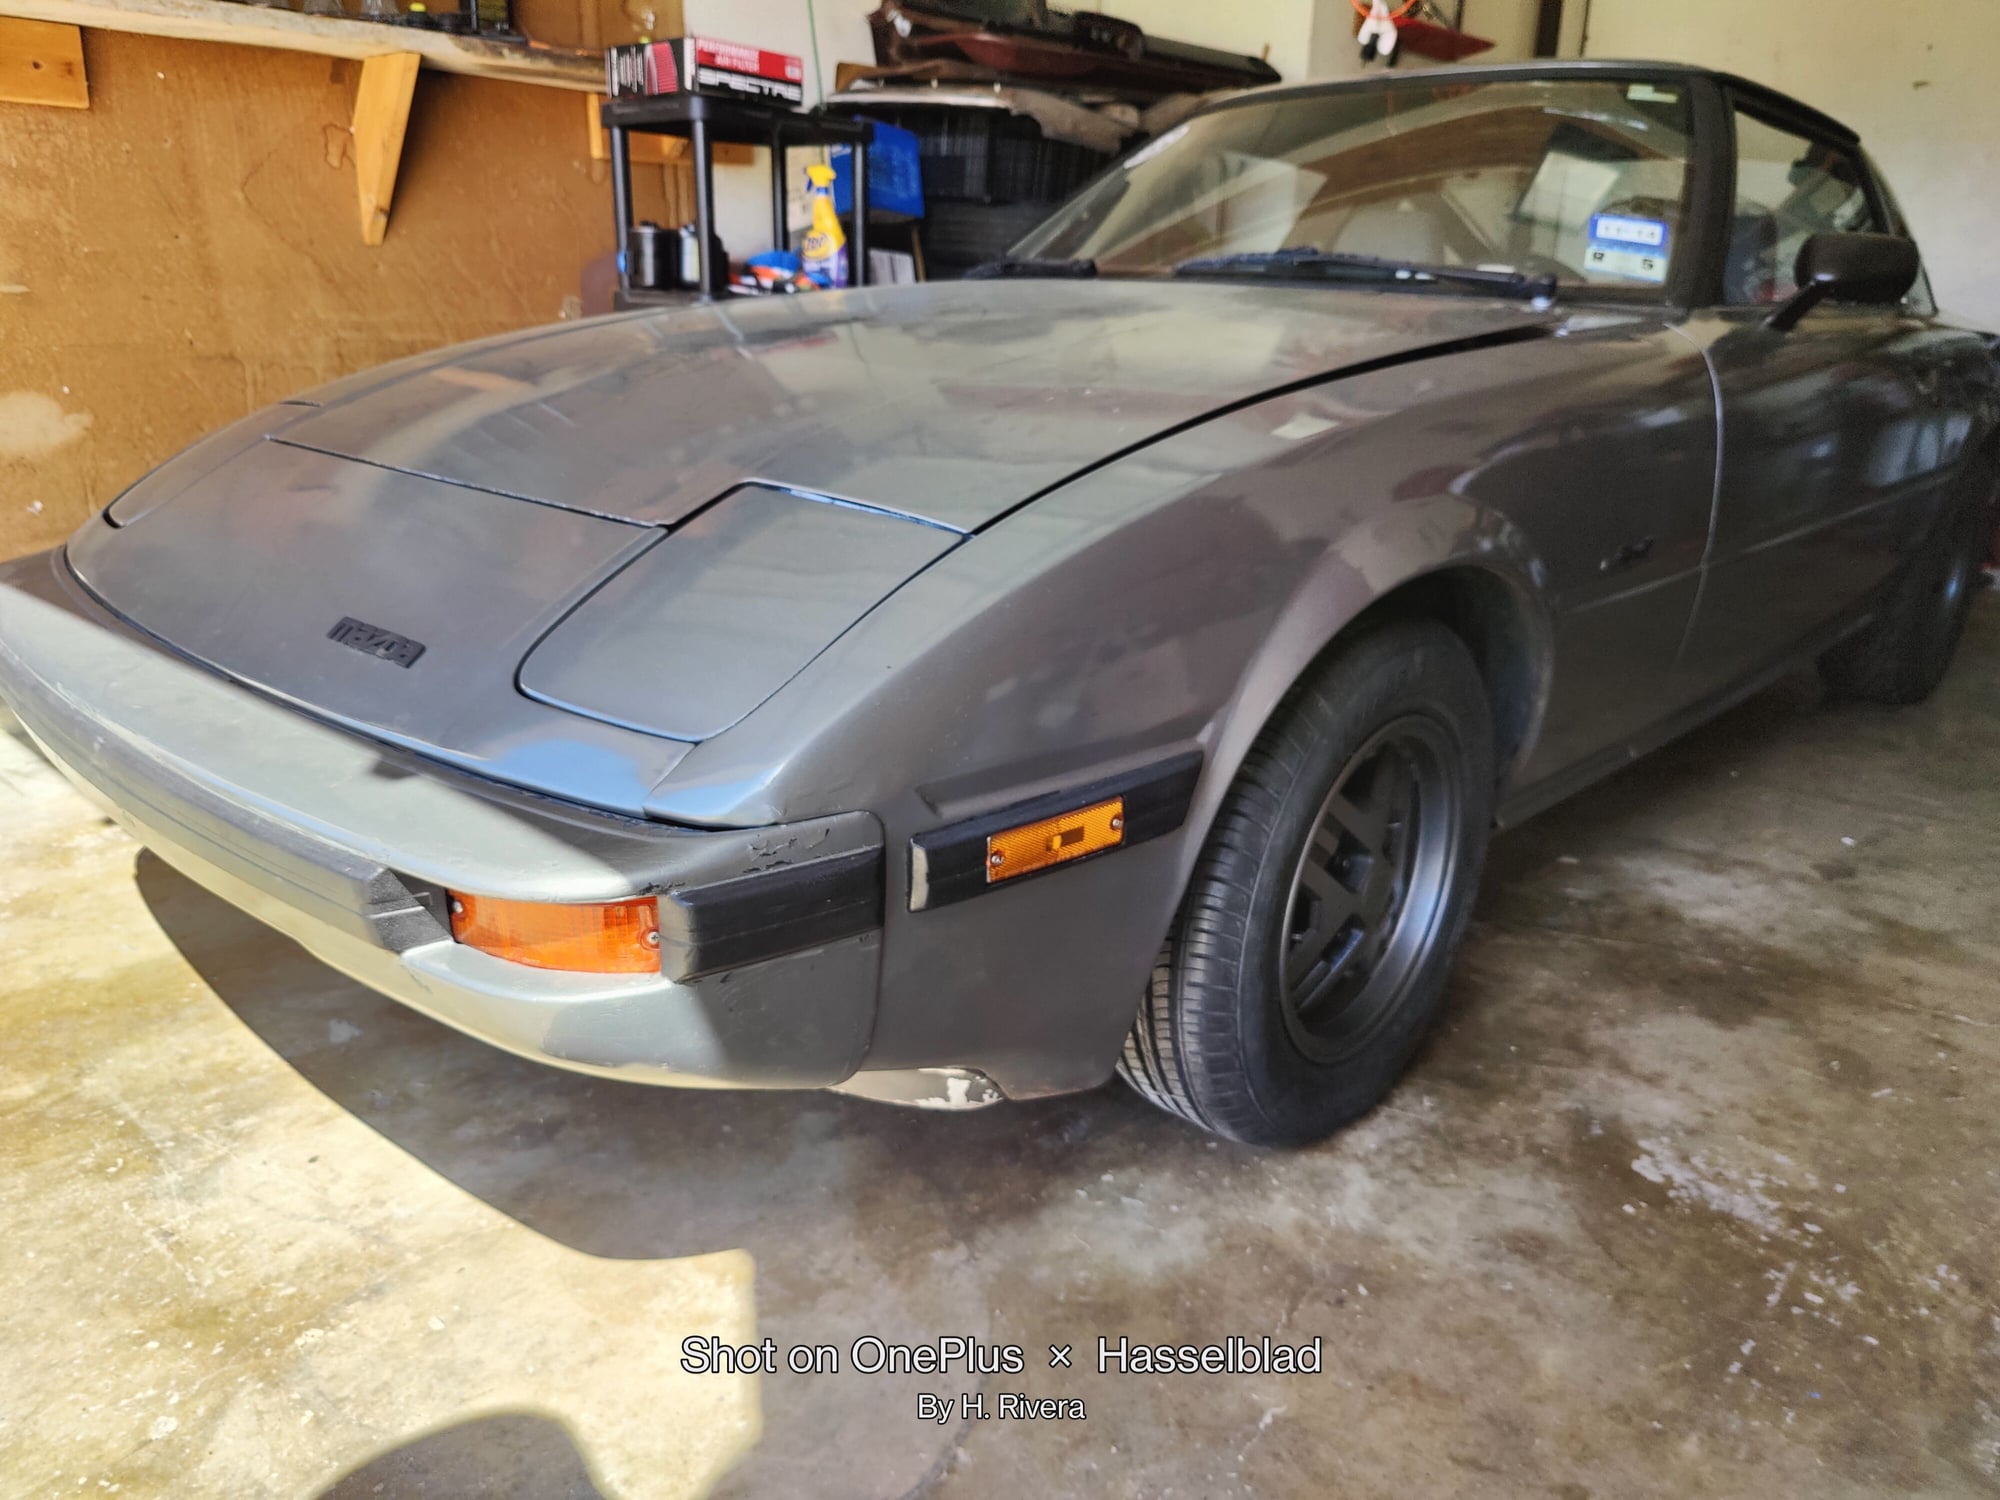 1982 Mazda RX-7 - For Sale - Used - VIN JM1FB3327C0632041 - Other - 2WD - Manual - Coupe - Gray - Allen, TX 75002, United States